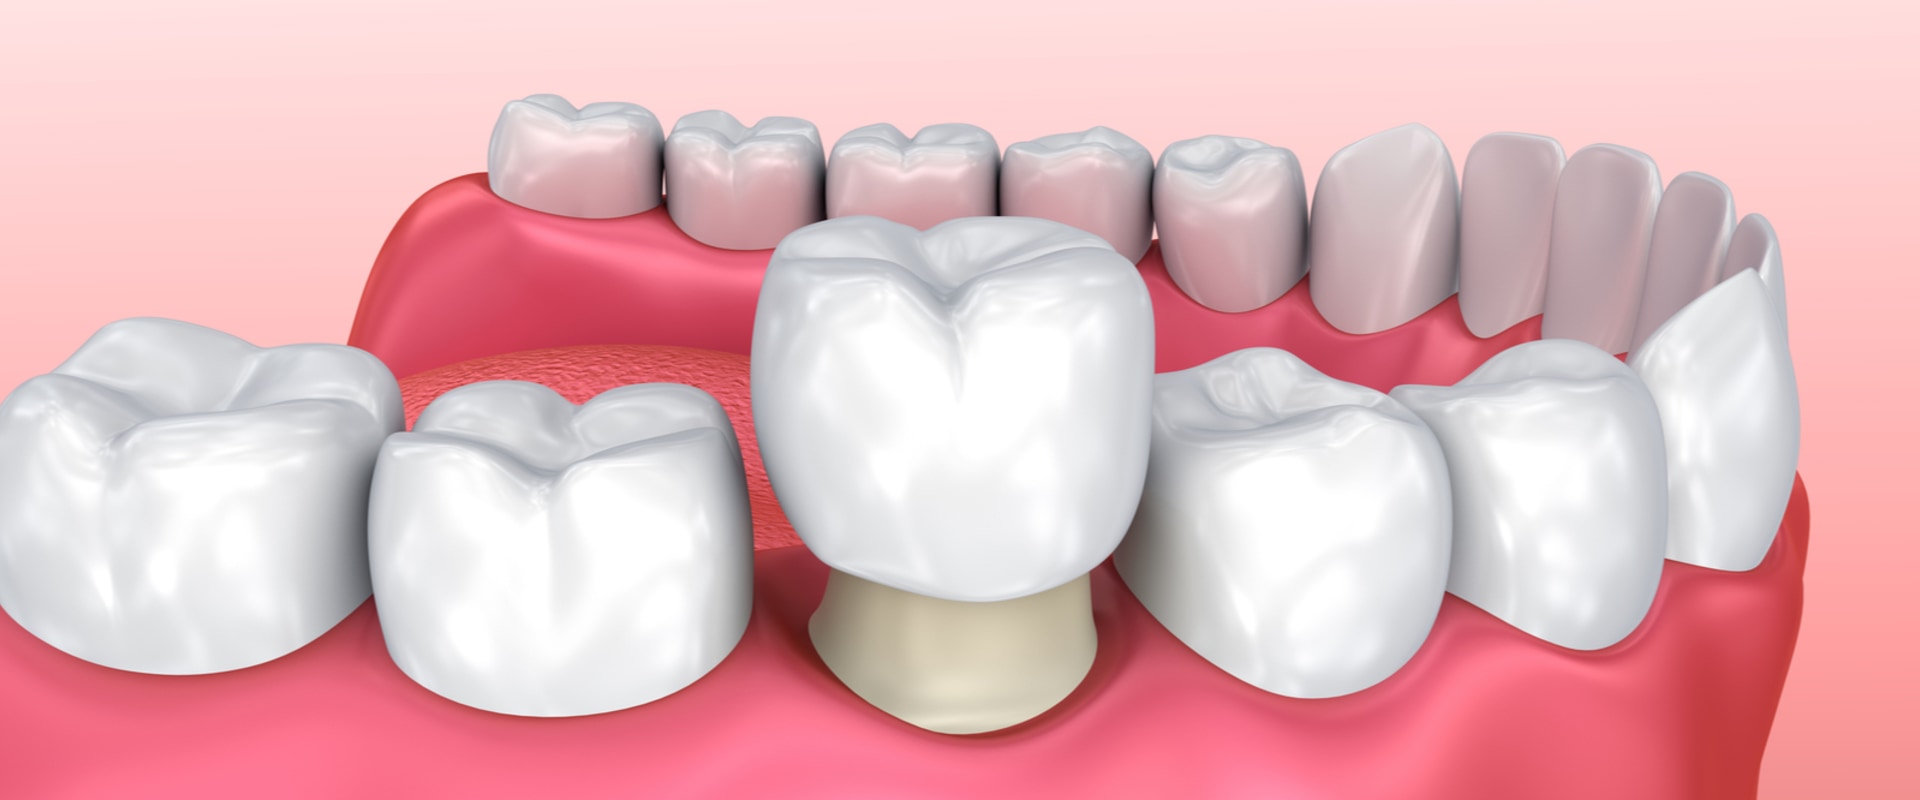 The Different Materials Used for Dental Crowns